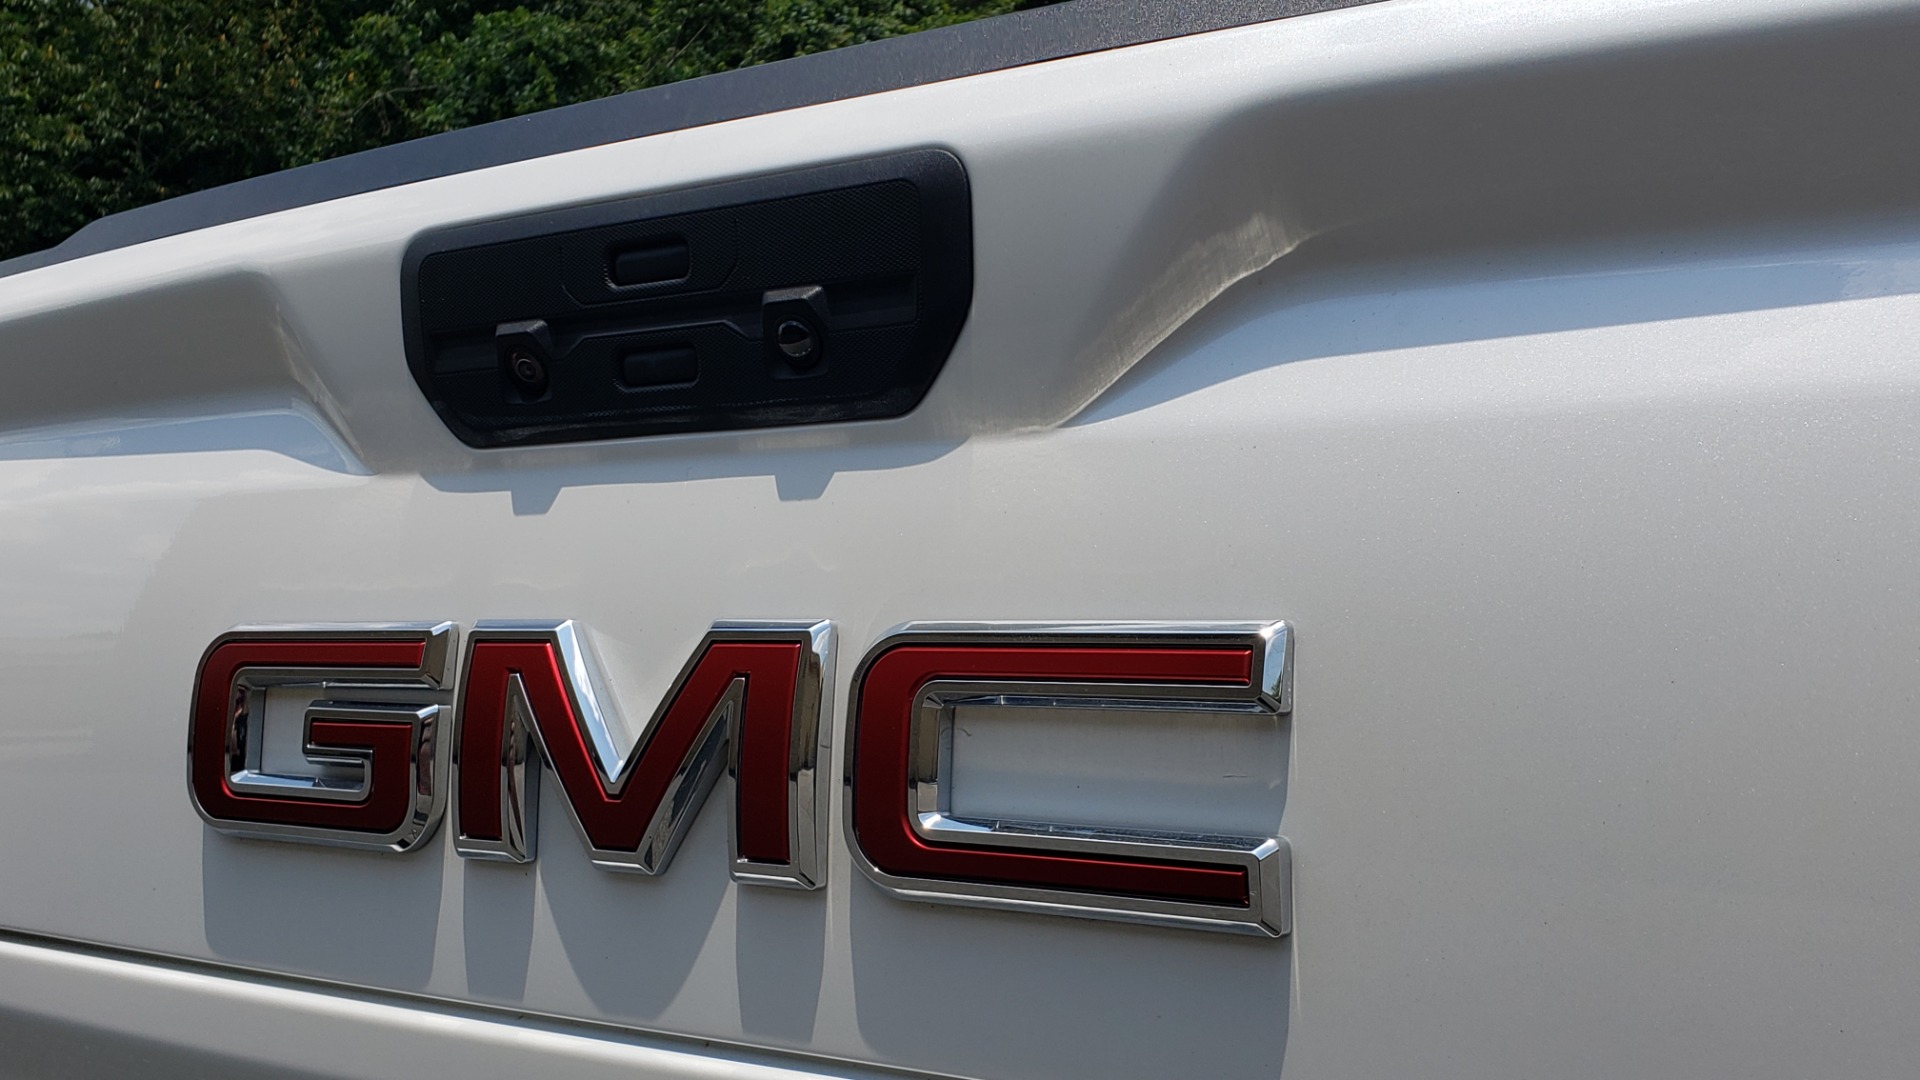 Used 2019 GMC SIERRA 1500 SLT 4WD CREWCAB / PREMIUM / 6.2L V8 / NAV / SUNROOF / VENT SEATS for sale Sold at Formula Imports in Charlotte NC 28227 35